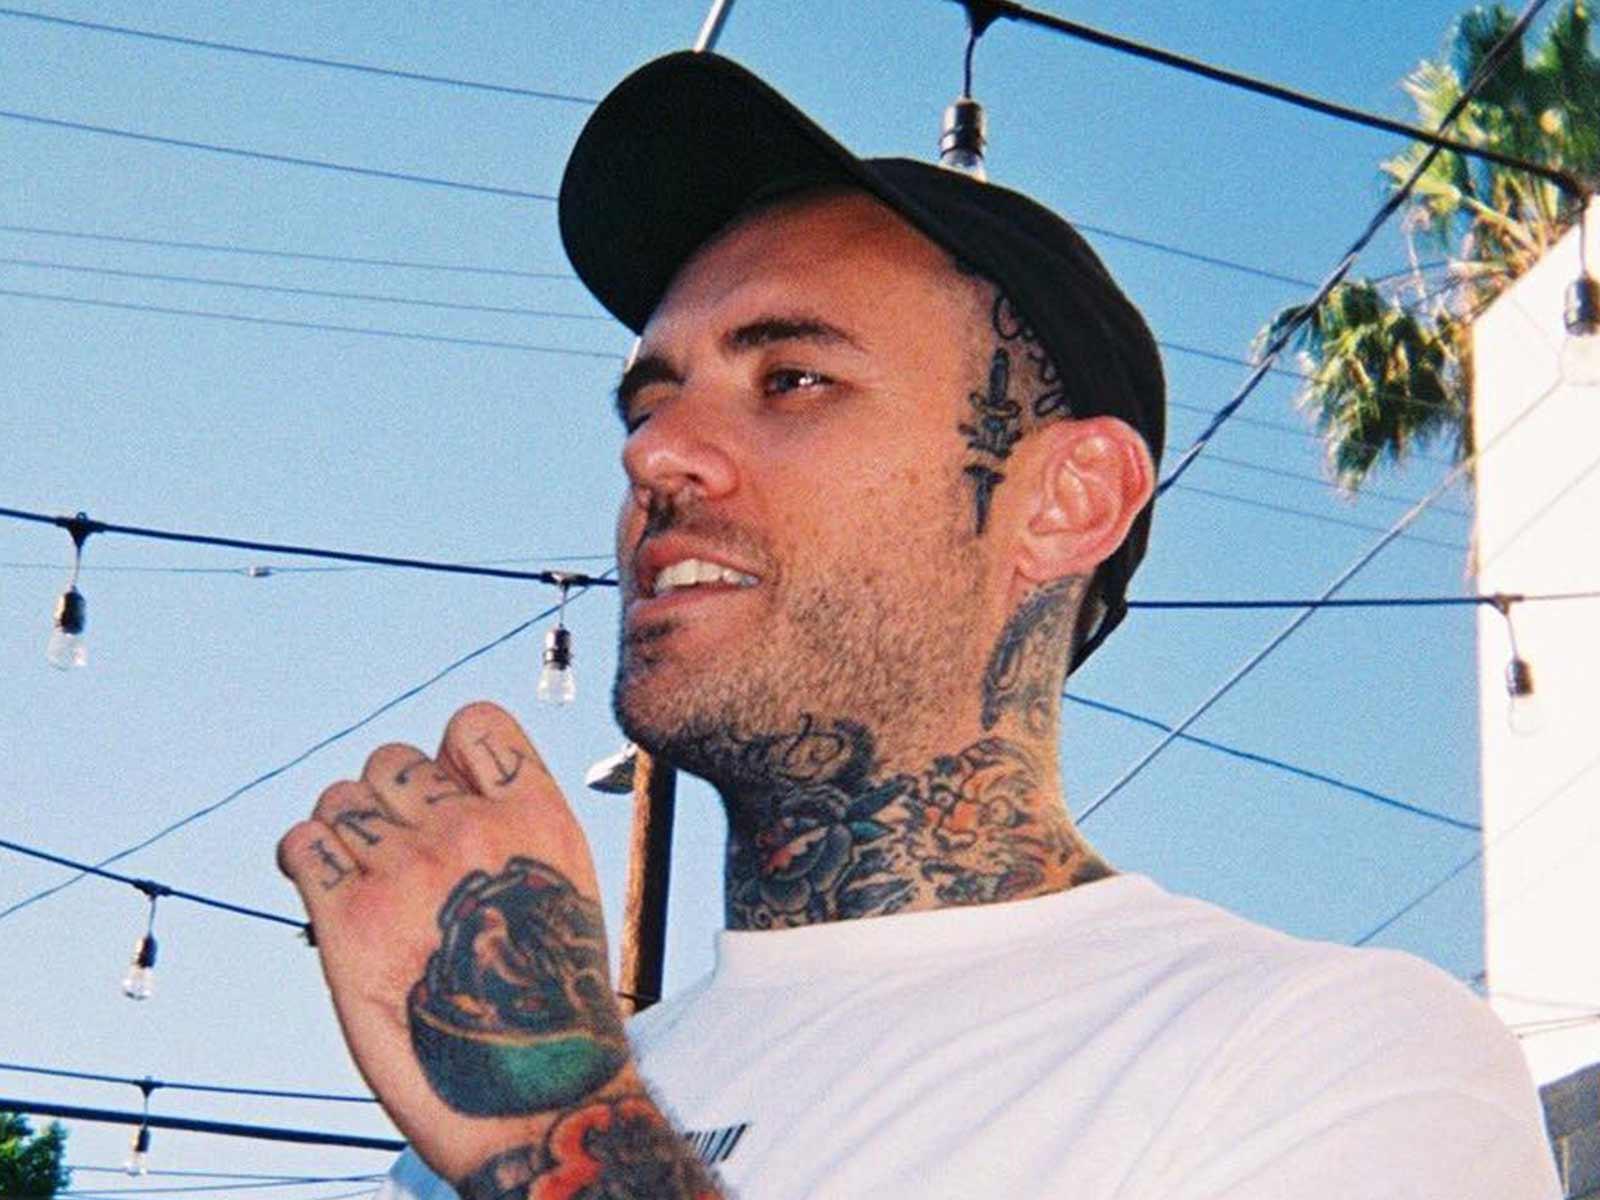 Adam22 Claims YouTube Is Targeting Large-Breasted Women for Demonetization